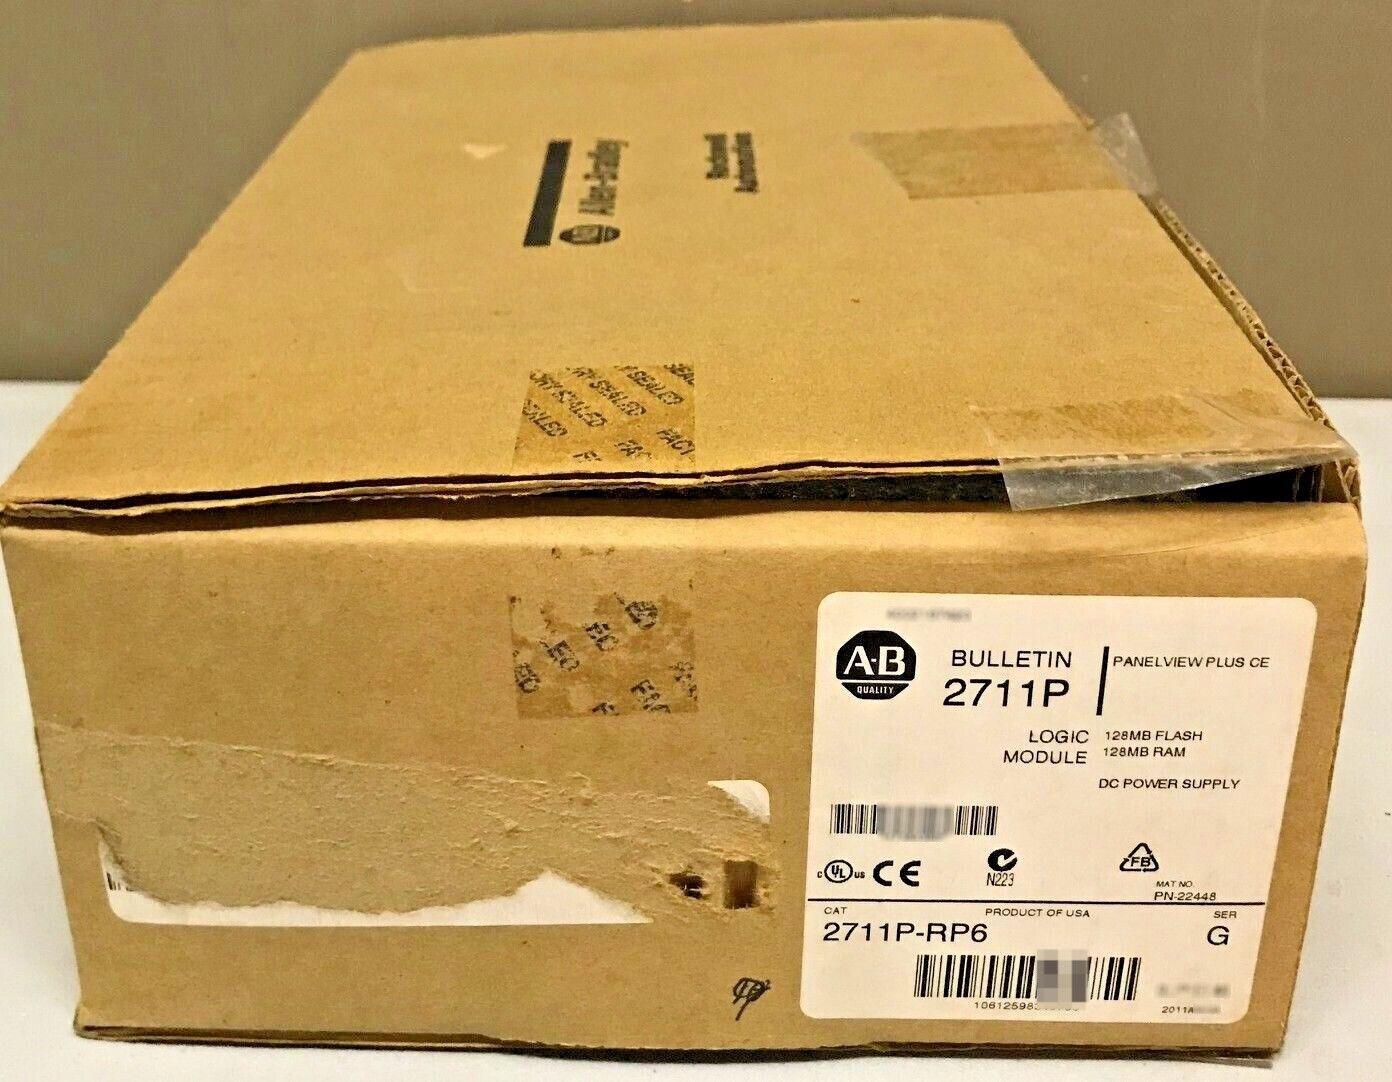 New AB 2711P-RP6 /G PanelView Plus CE Logic Module 128MB Flash 128MB NEW